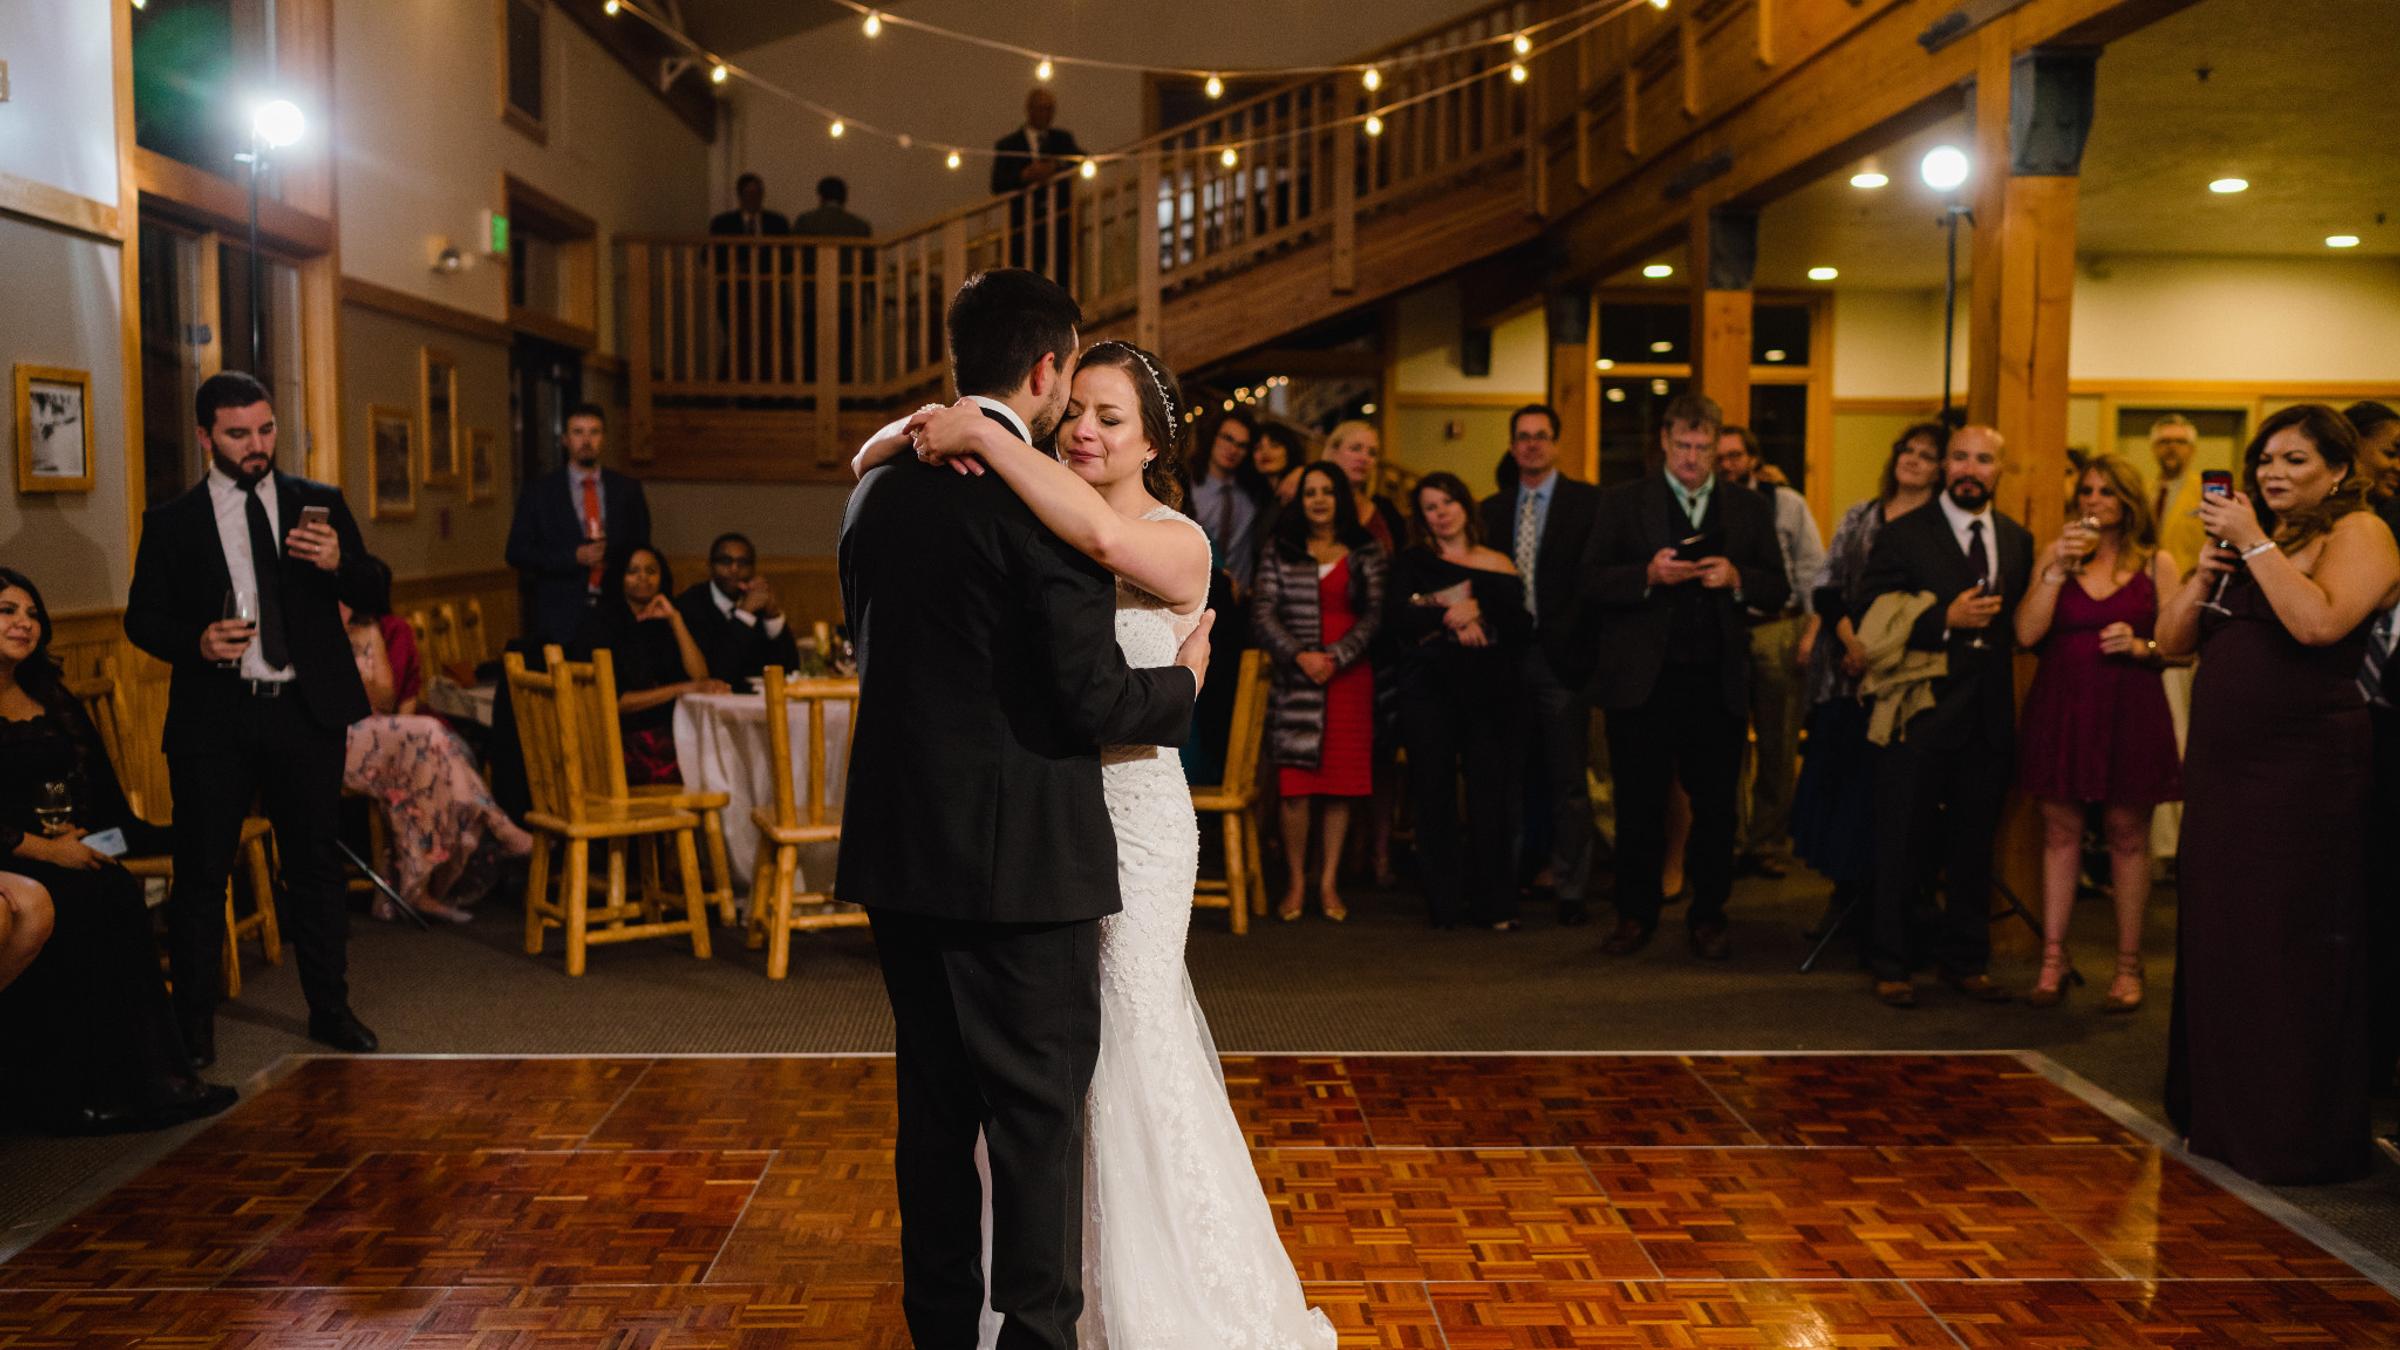 Bride and Groom First Dance inside Last chance Lodge